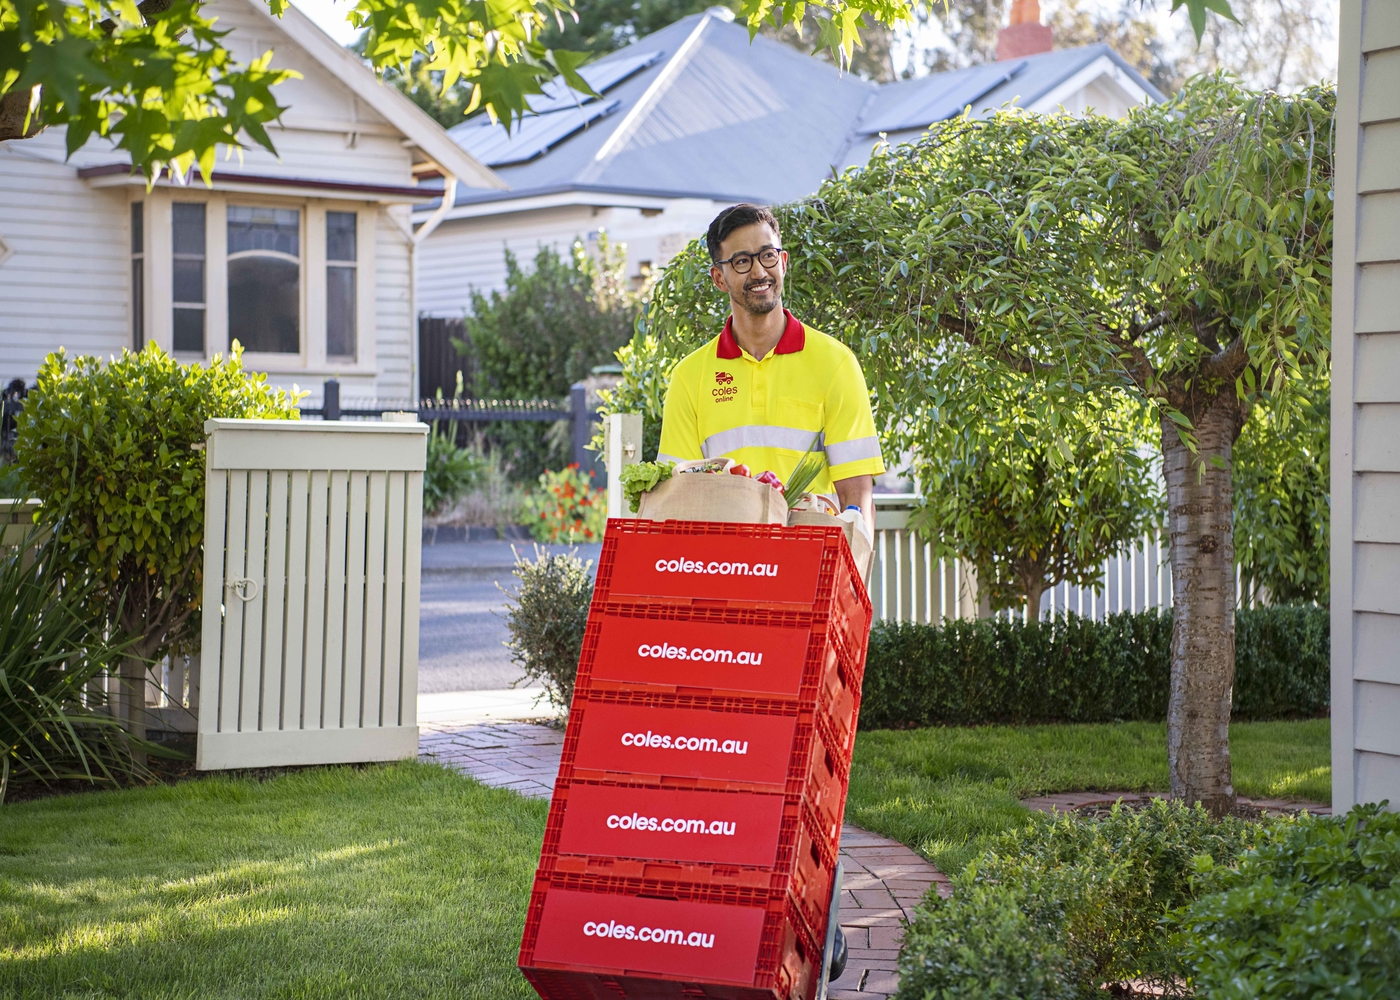 Coles Online home delivery